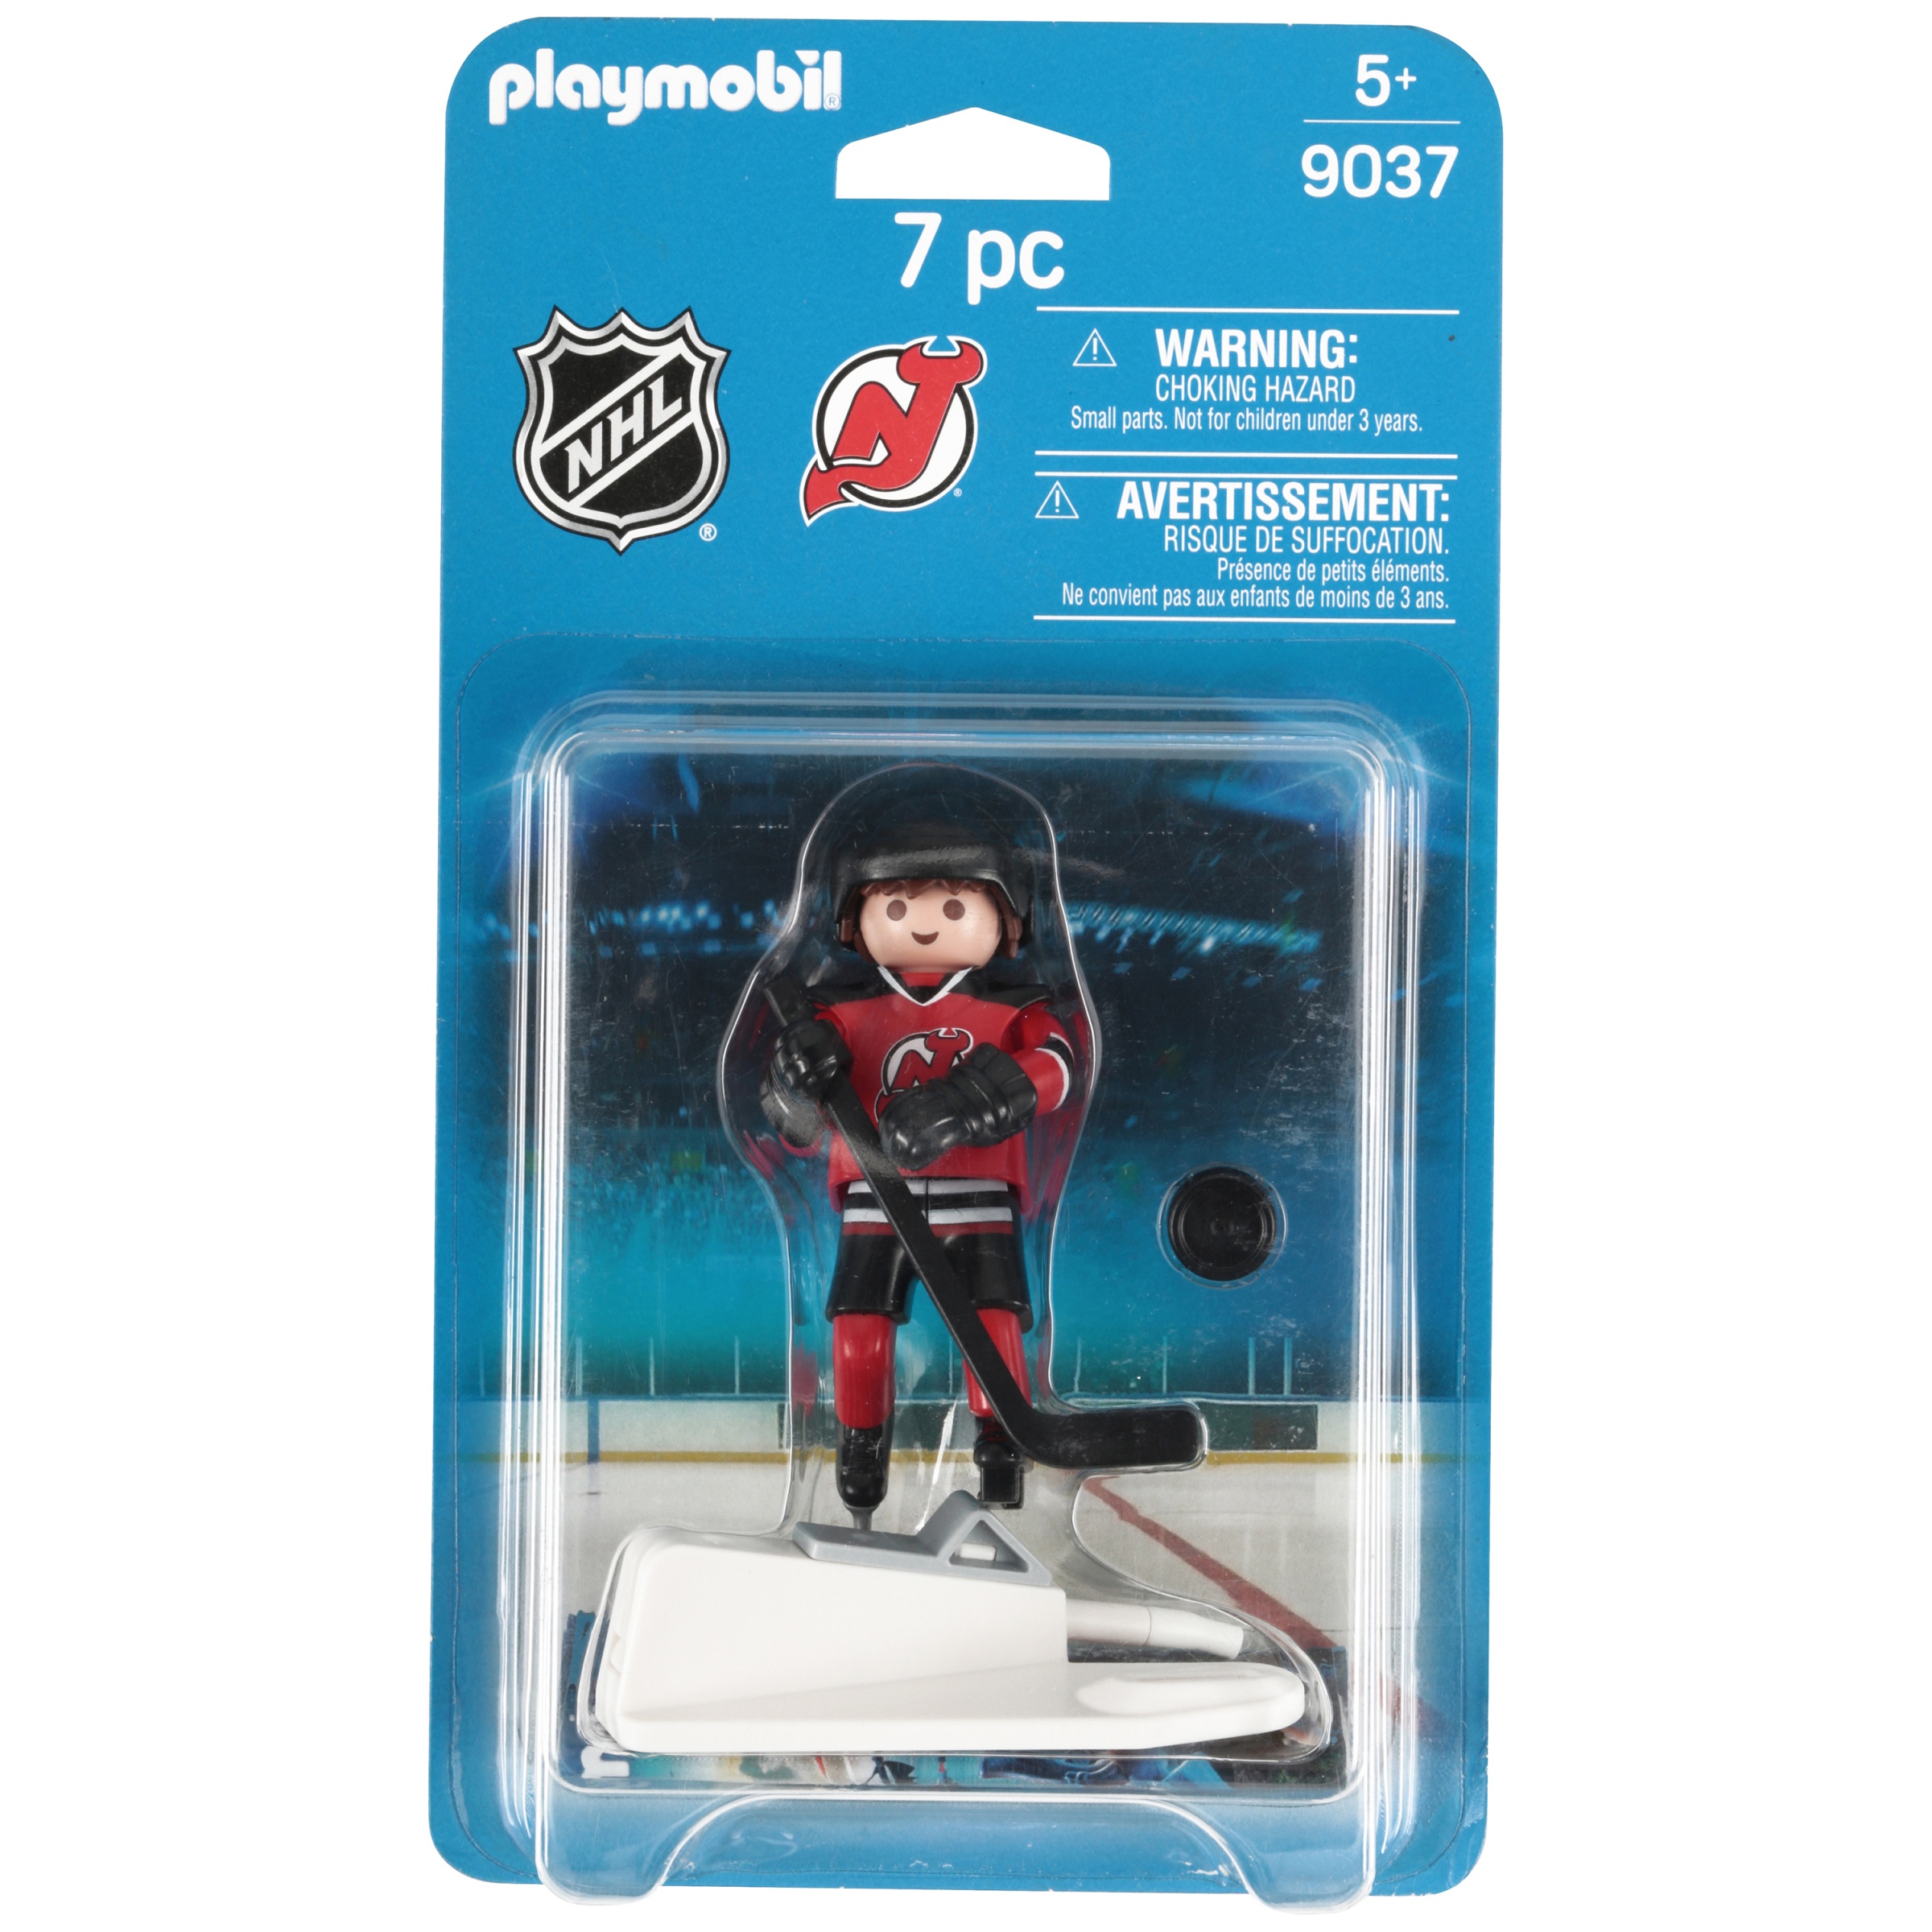 PLAYMOBIL NHL New Jersey Devils Player Figure - image 4 of 4